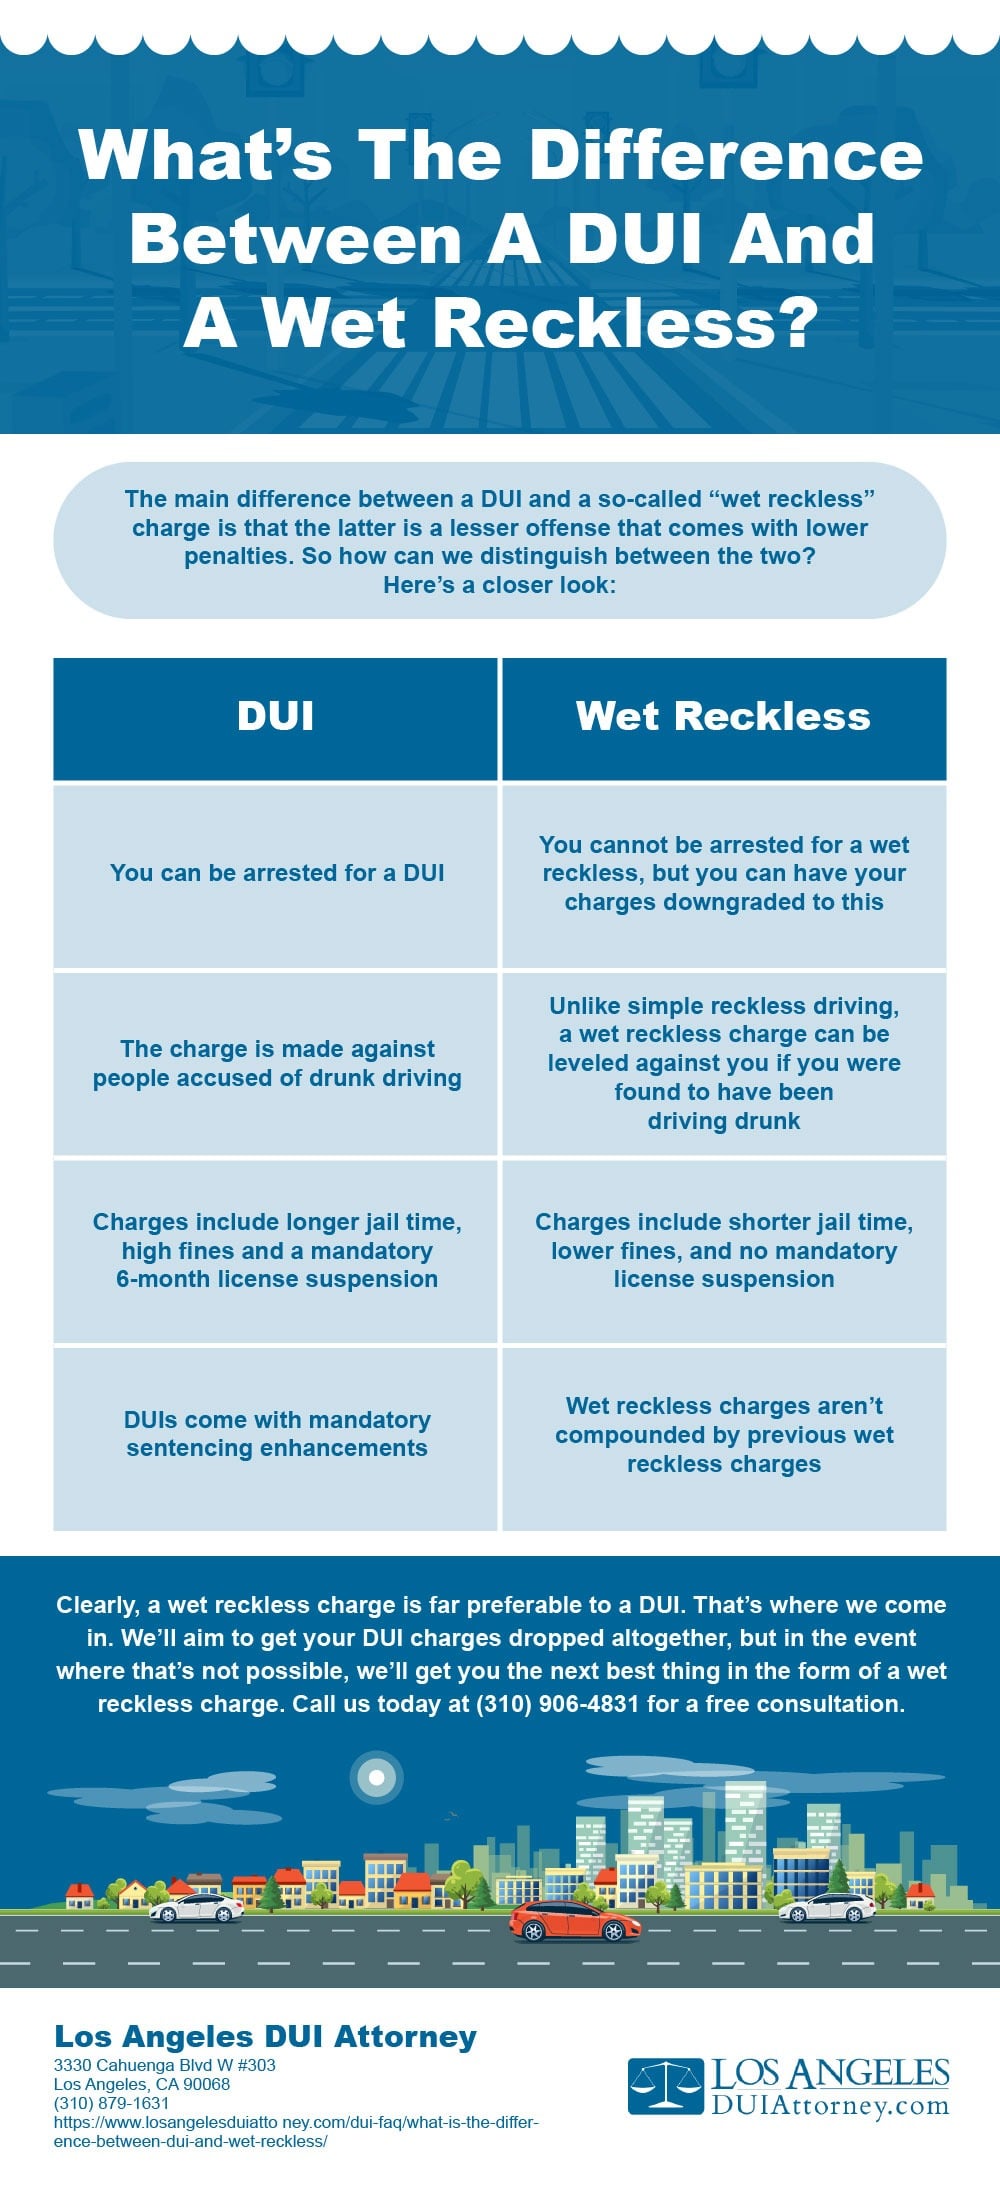 What is the difference between DUI and “Wet Reckless”?